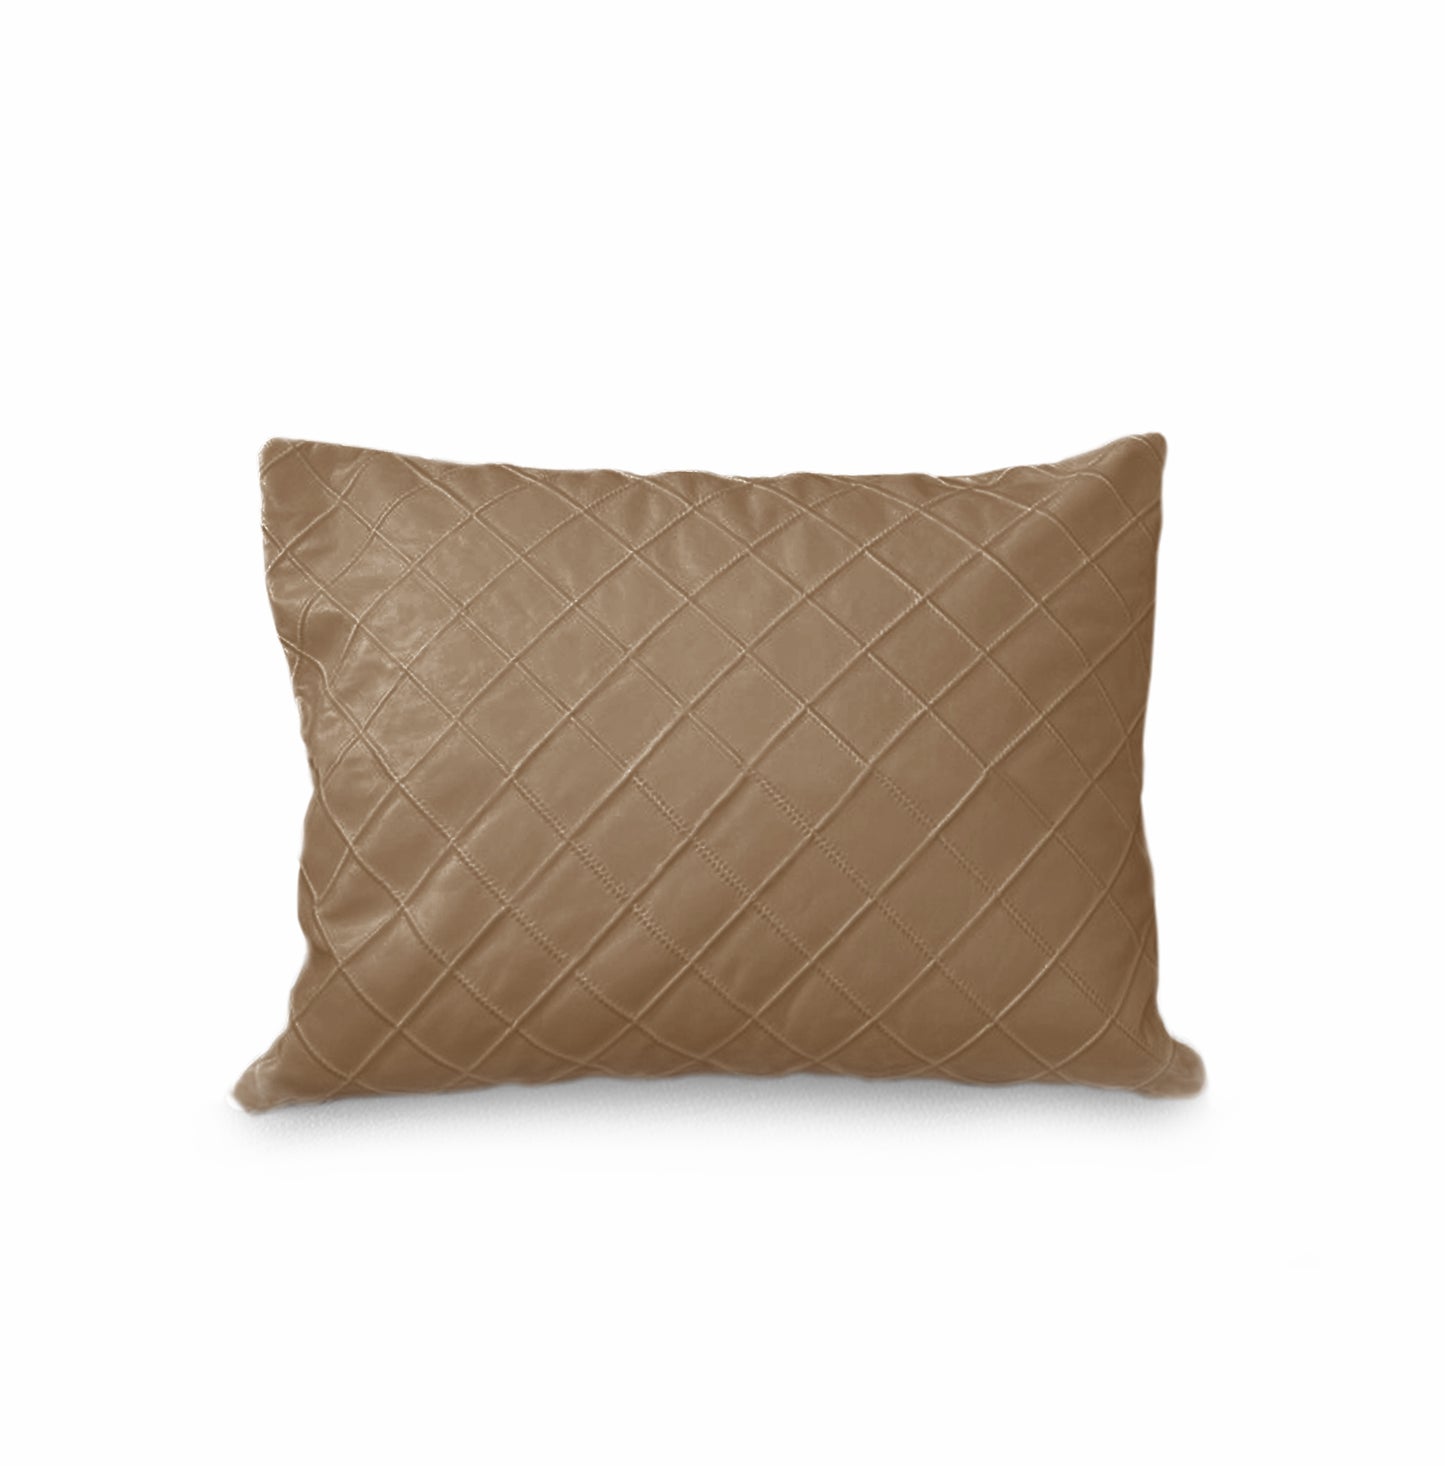 ST. BARTH LEATHER PILLOW CASE L